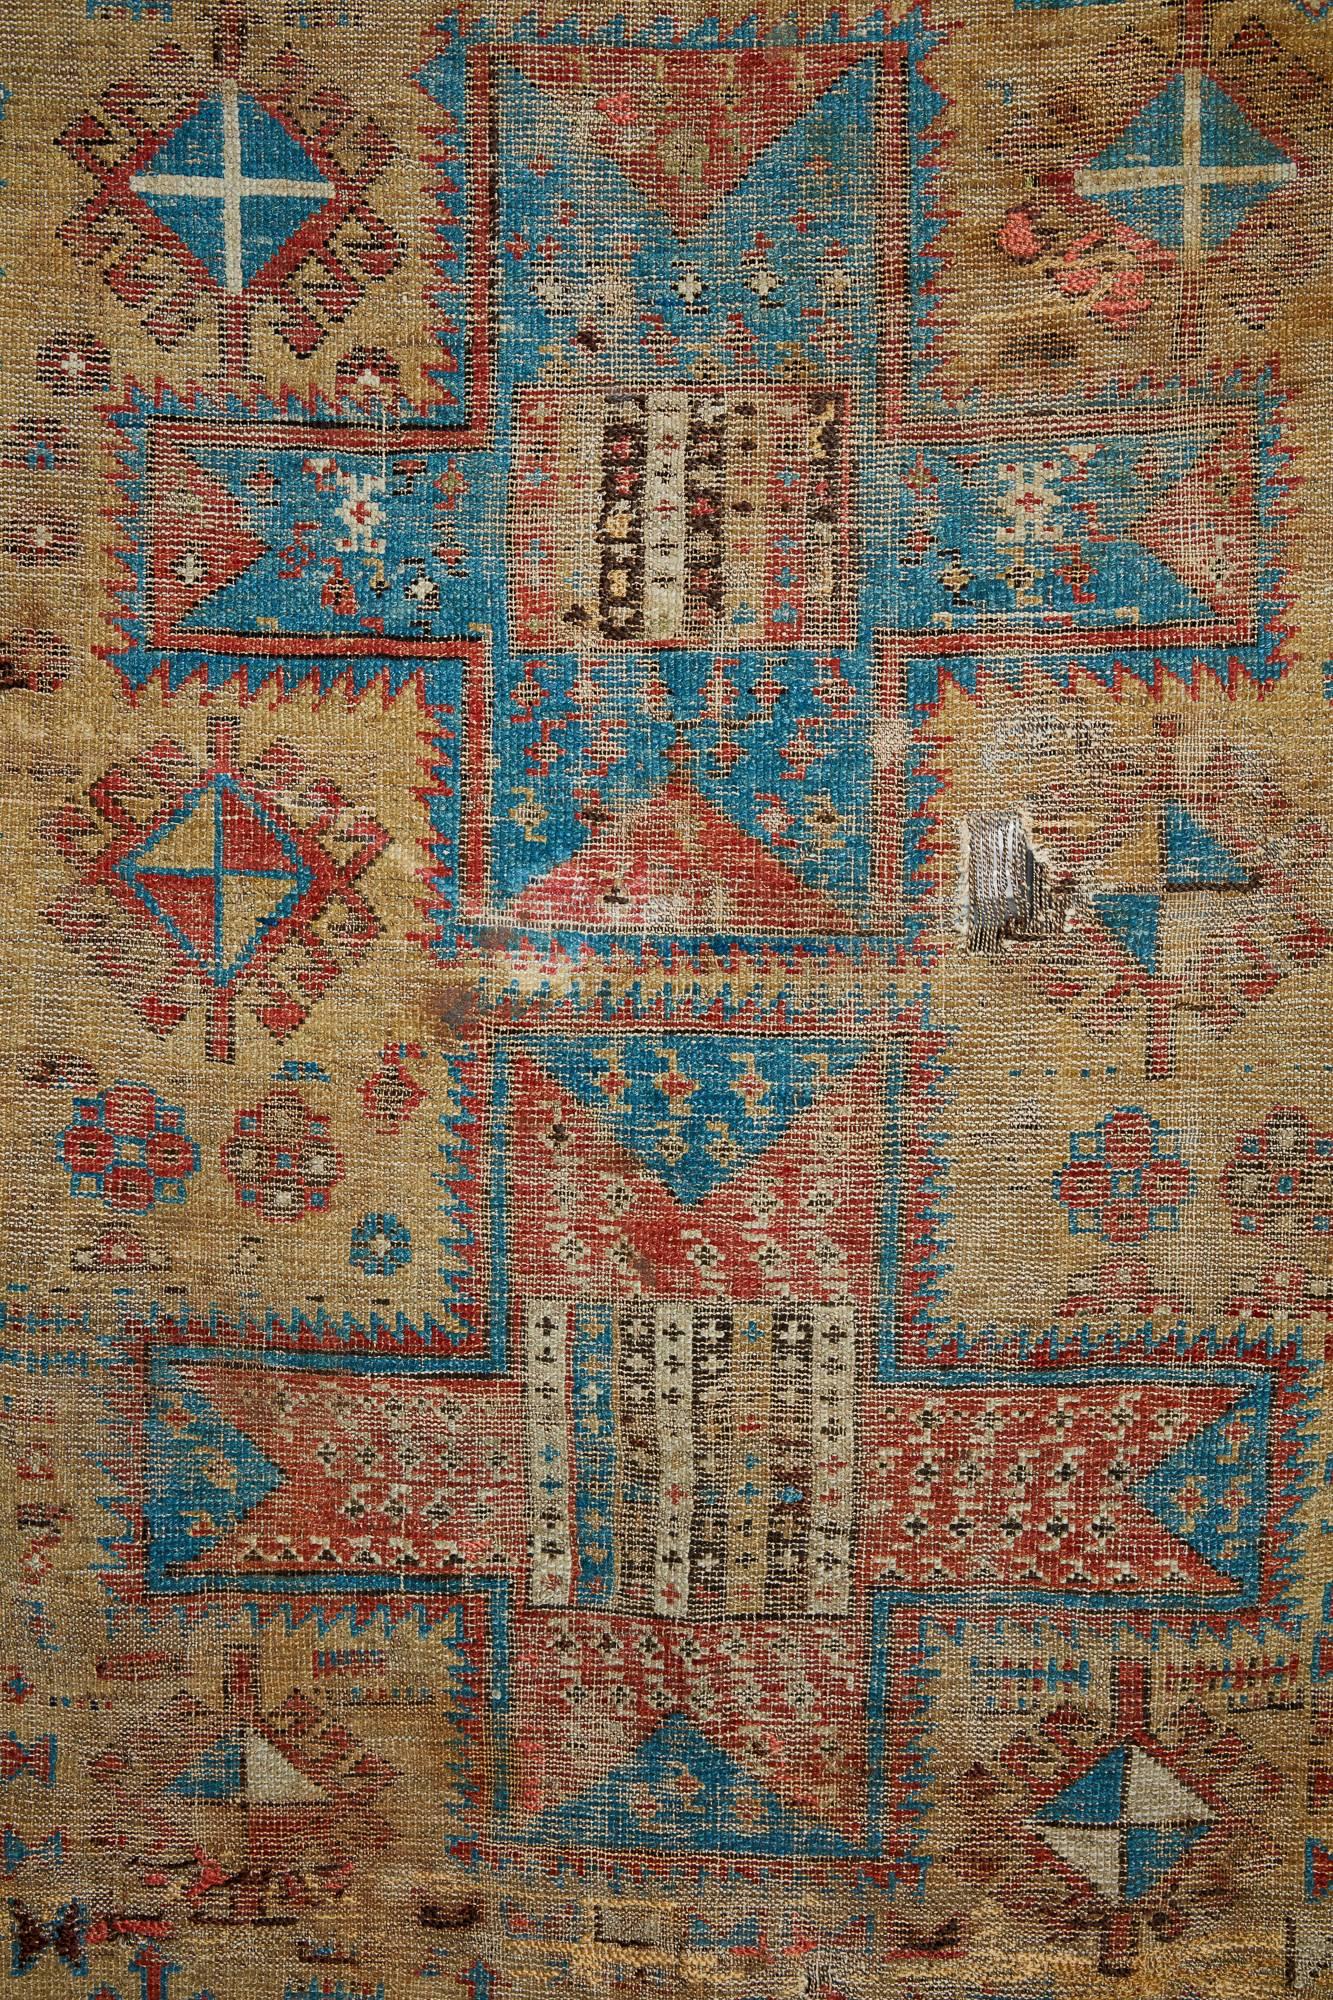 Late 19th century super worn antique Caucasian rug
From the Mountain Range Caucasus
This is a beautiful tapestry would be wonderful as a wall hanging or upholstery fabric with backing 
Colors are more soft and muted than shown in photos.
 